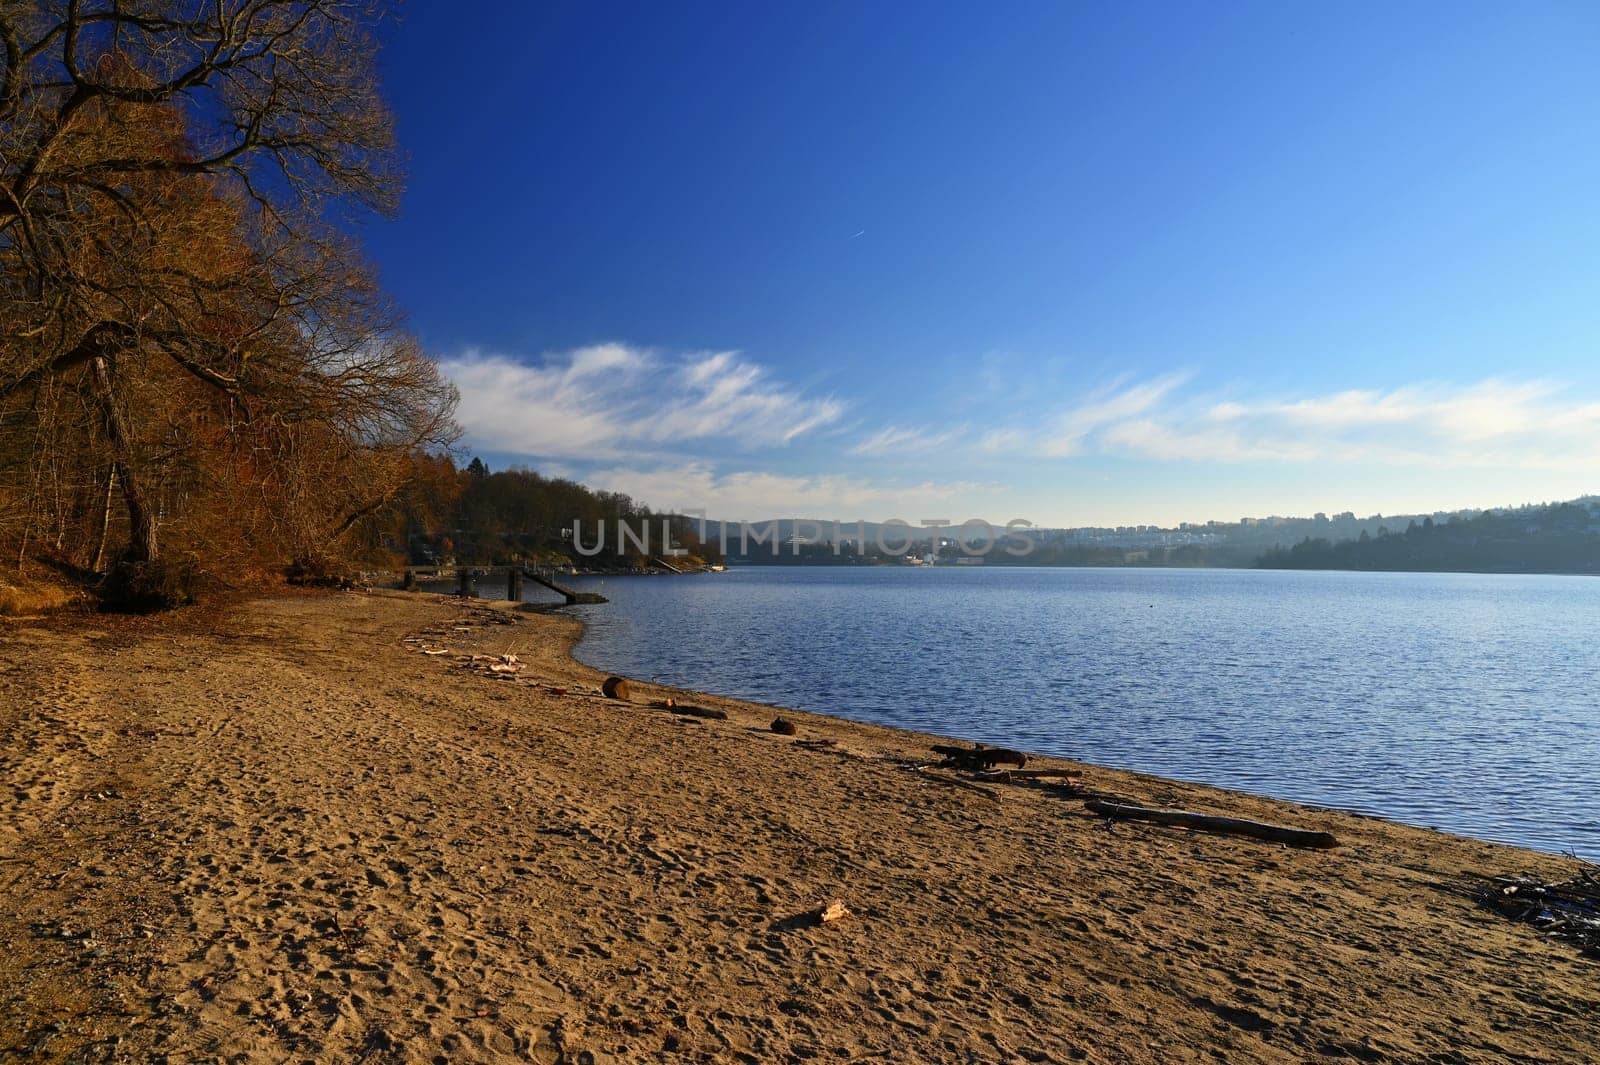 Brno Reservoir - City of Brno - Czech Republic - Europe. Beautiful landscape with water and beach. Nice sunny weather with blue sky in winter time. by Montypeter